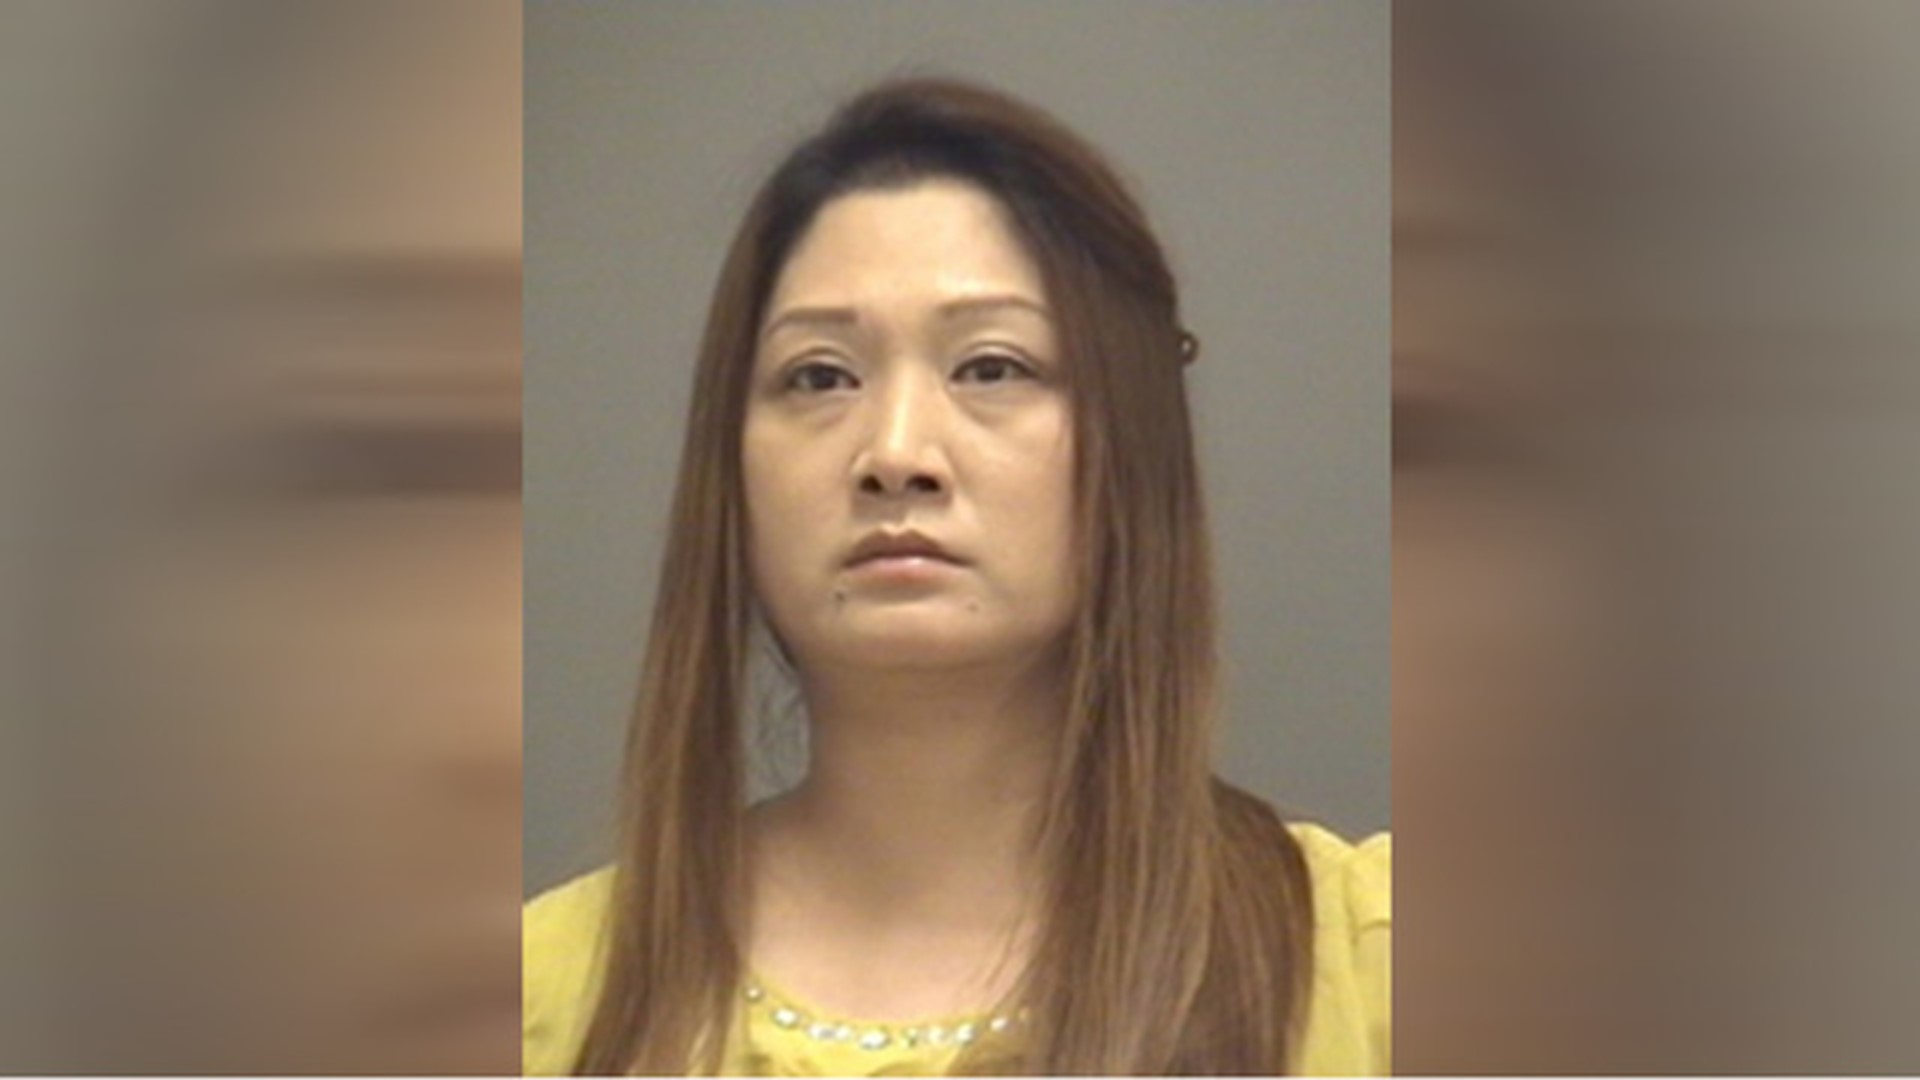 Nc Massage Parlor Owner Arrested On Prostitution Charges | Free ...